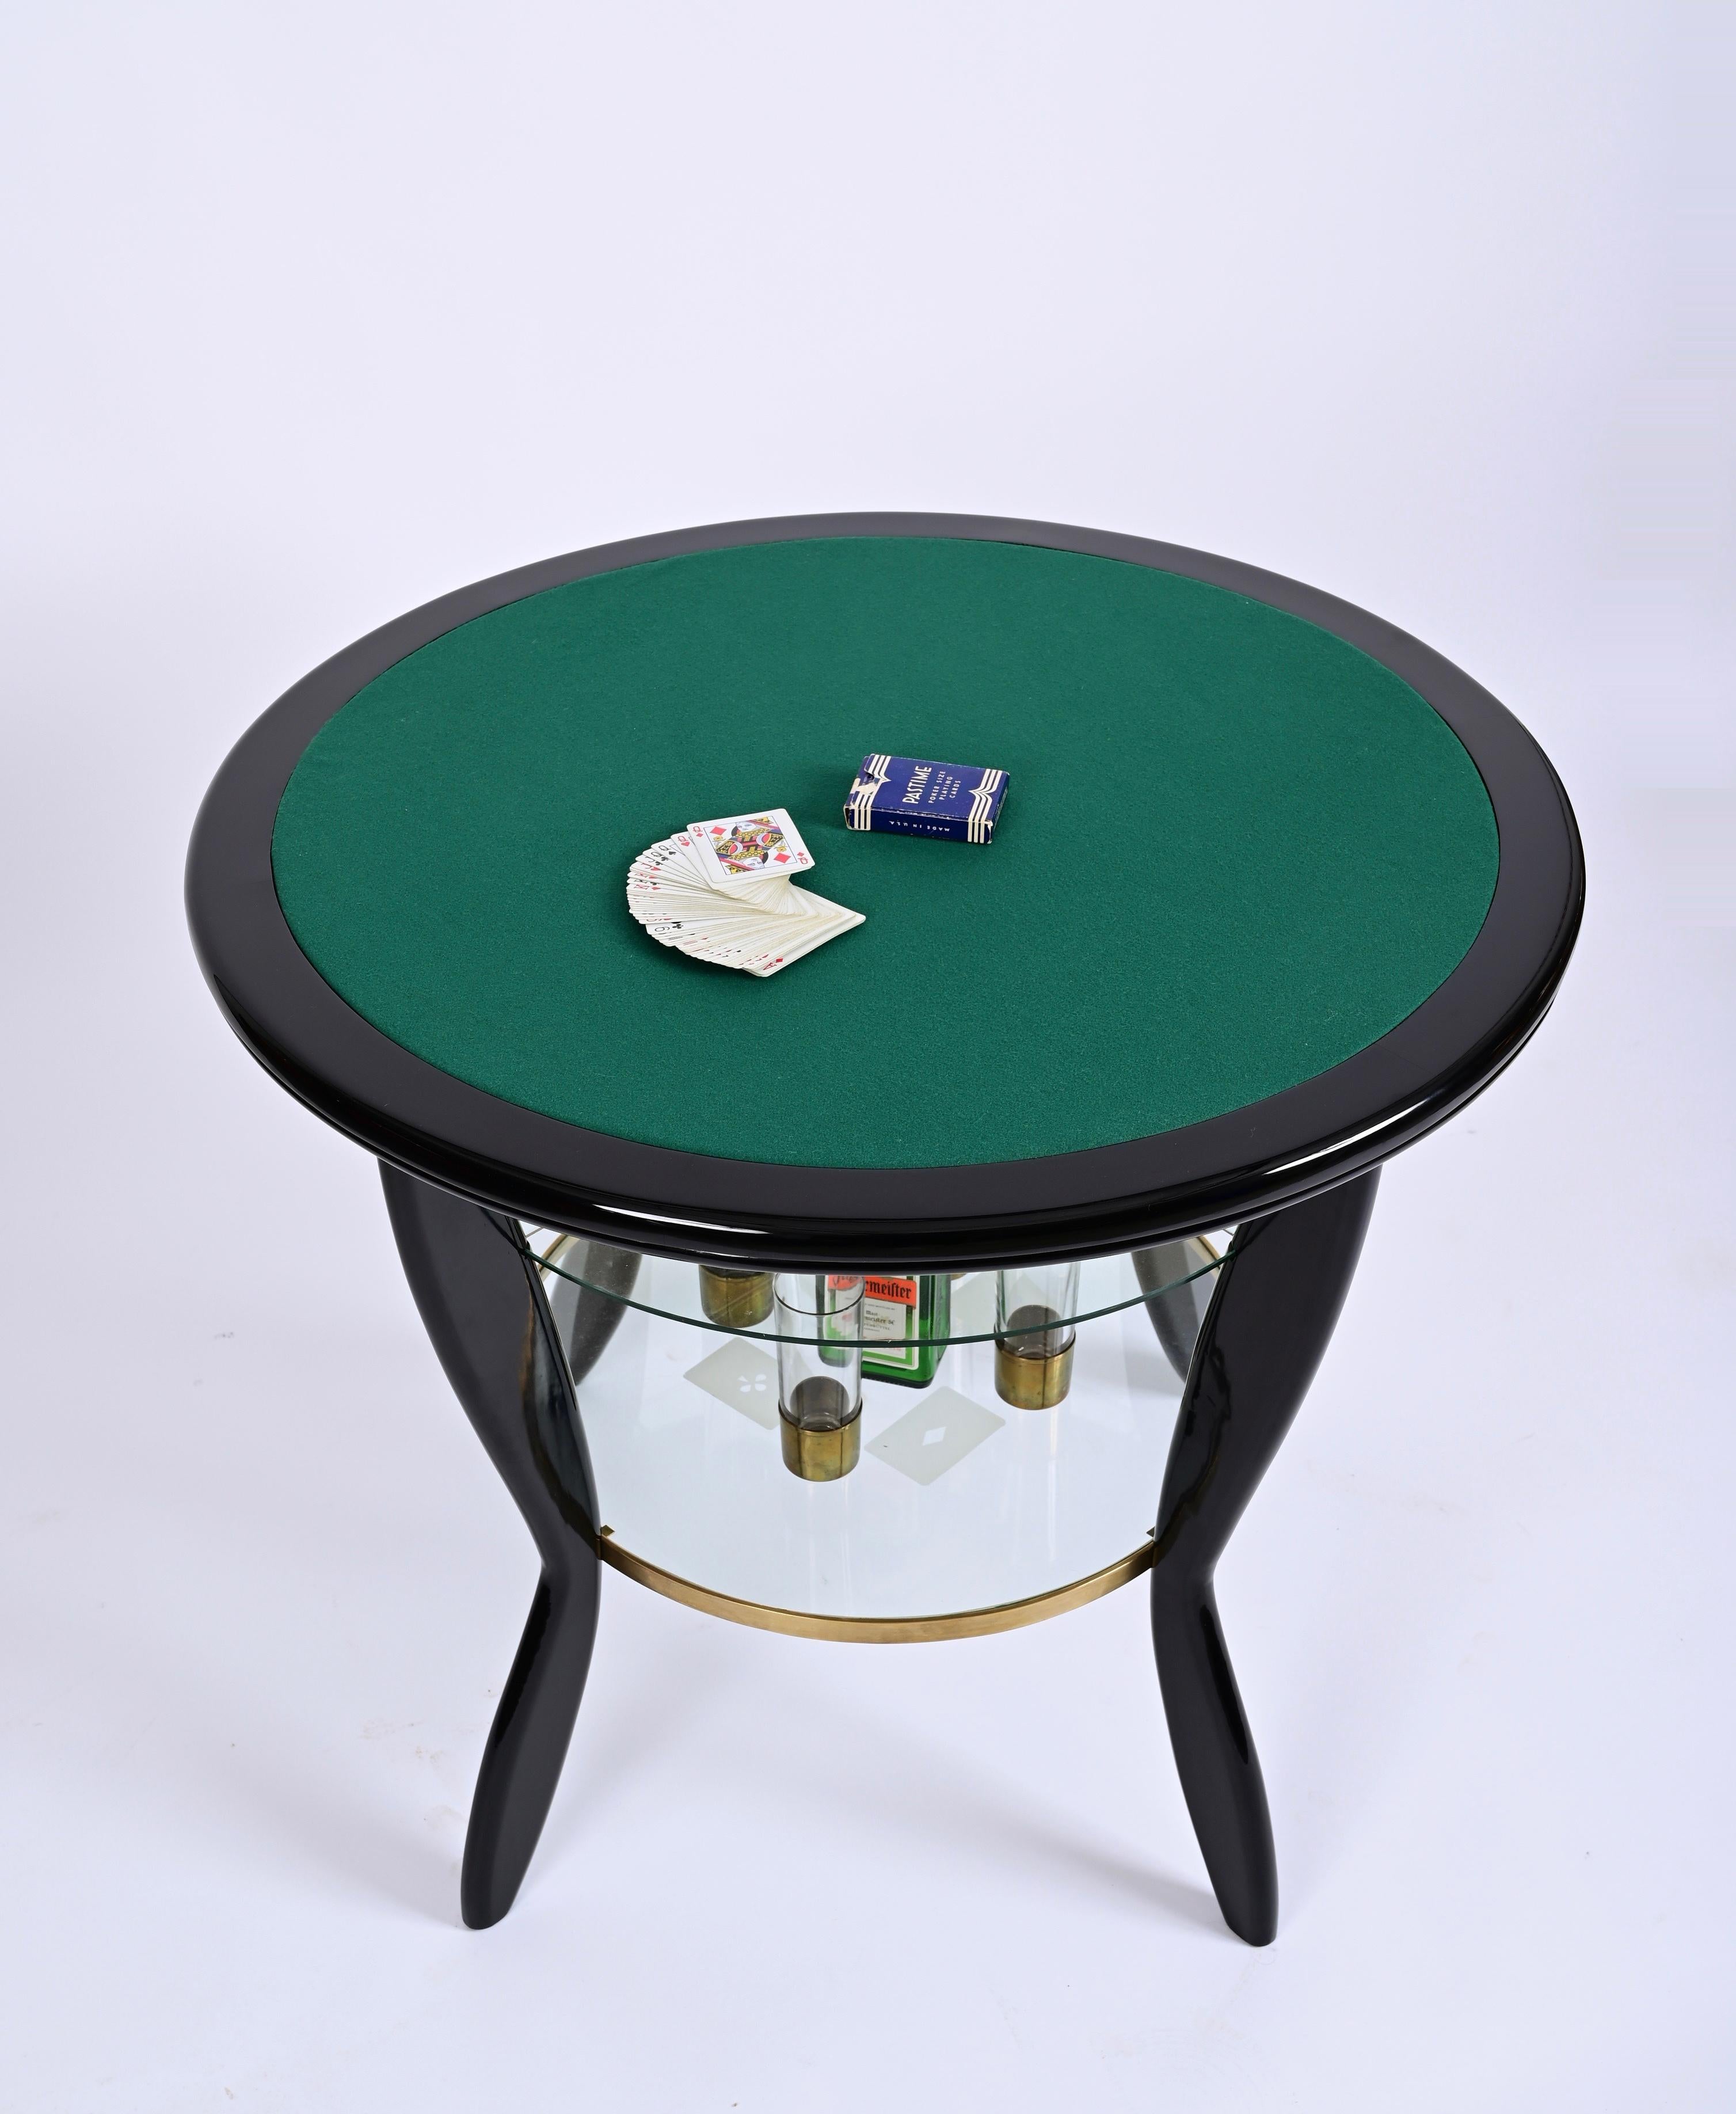 Gio Ponti Style Ebonized Beech and Brass Italian Game Table with Glass, 1950s For Sale 8